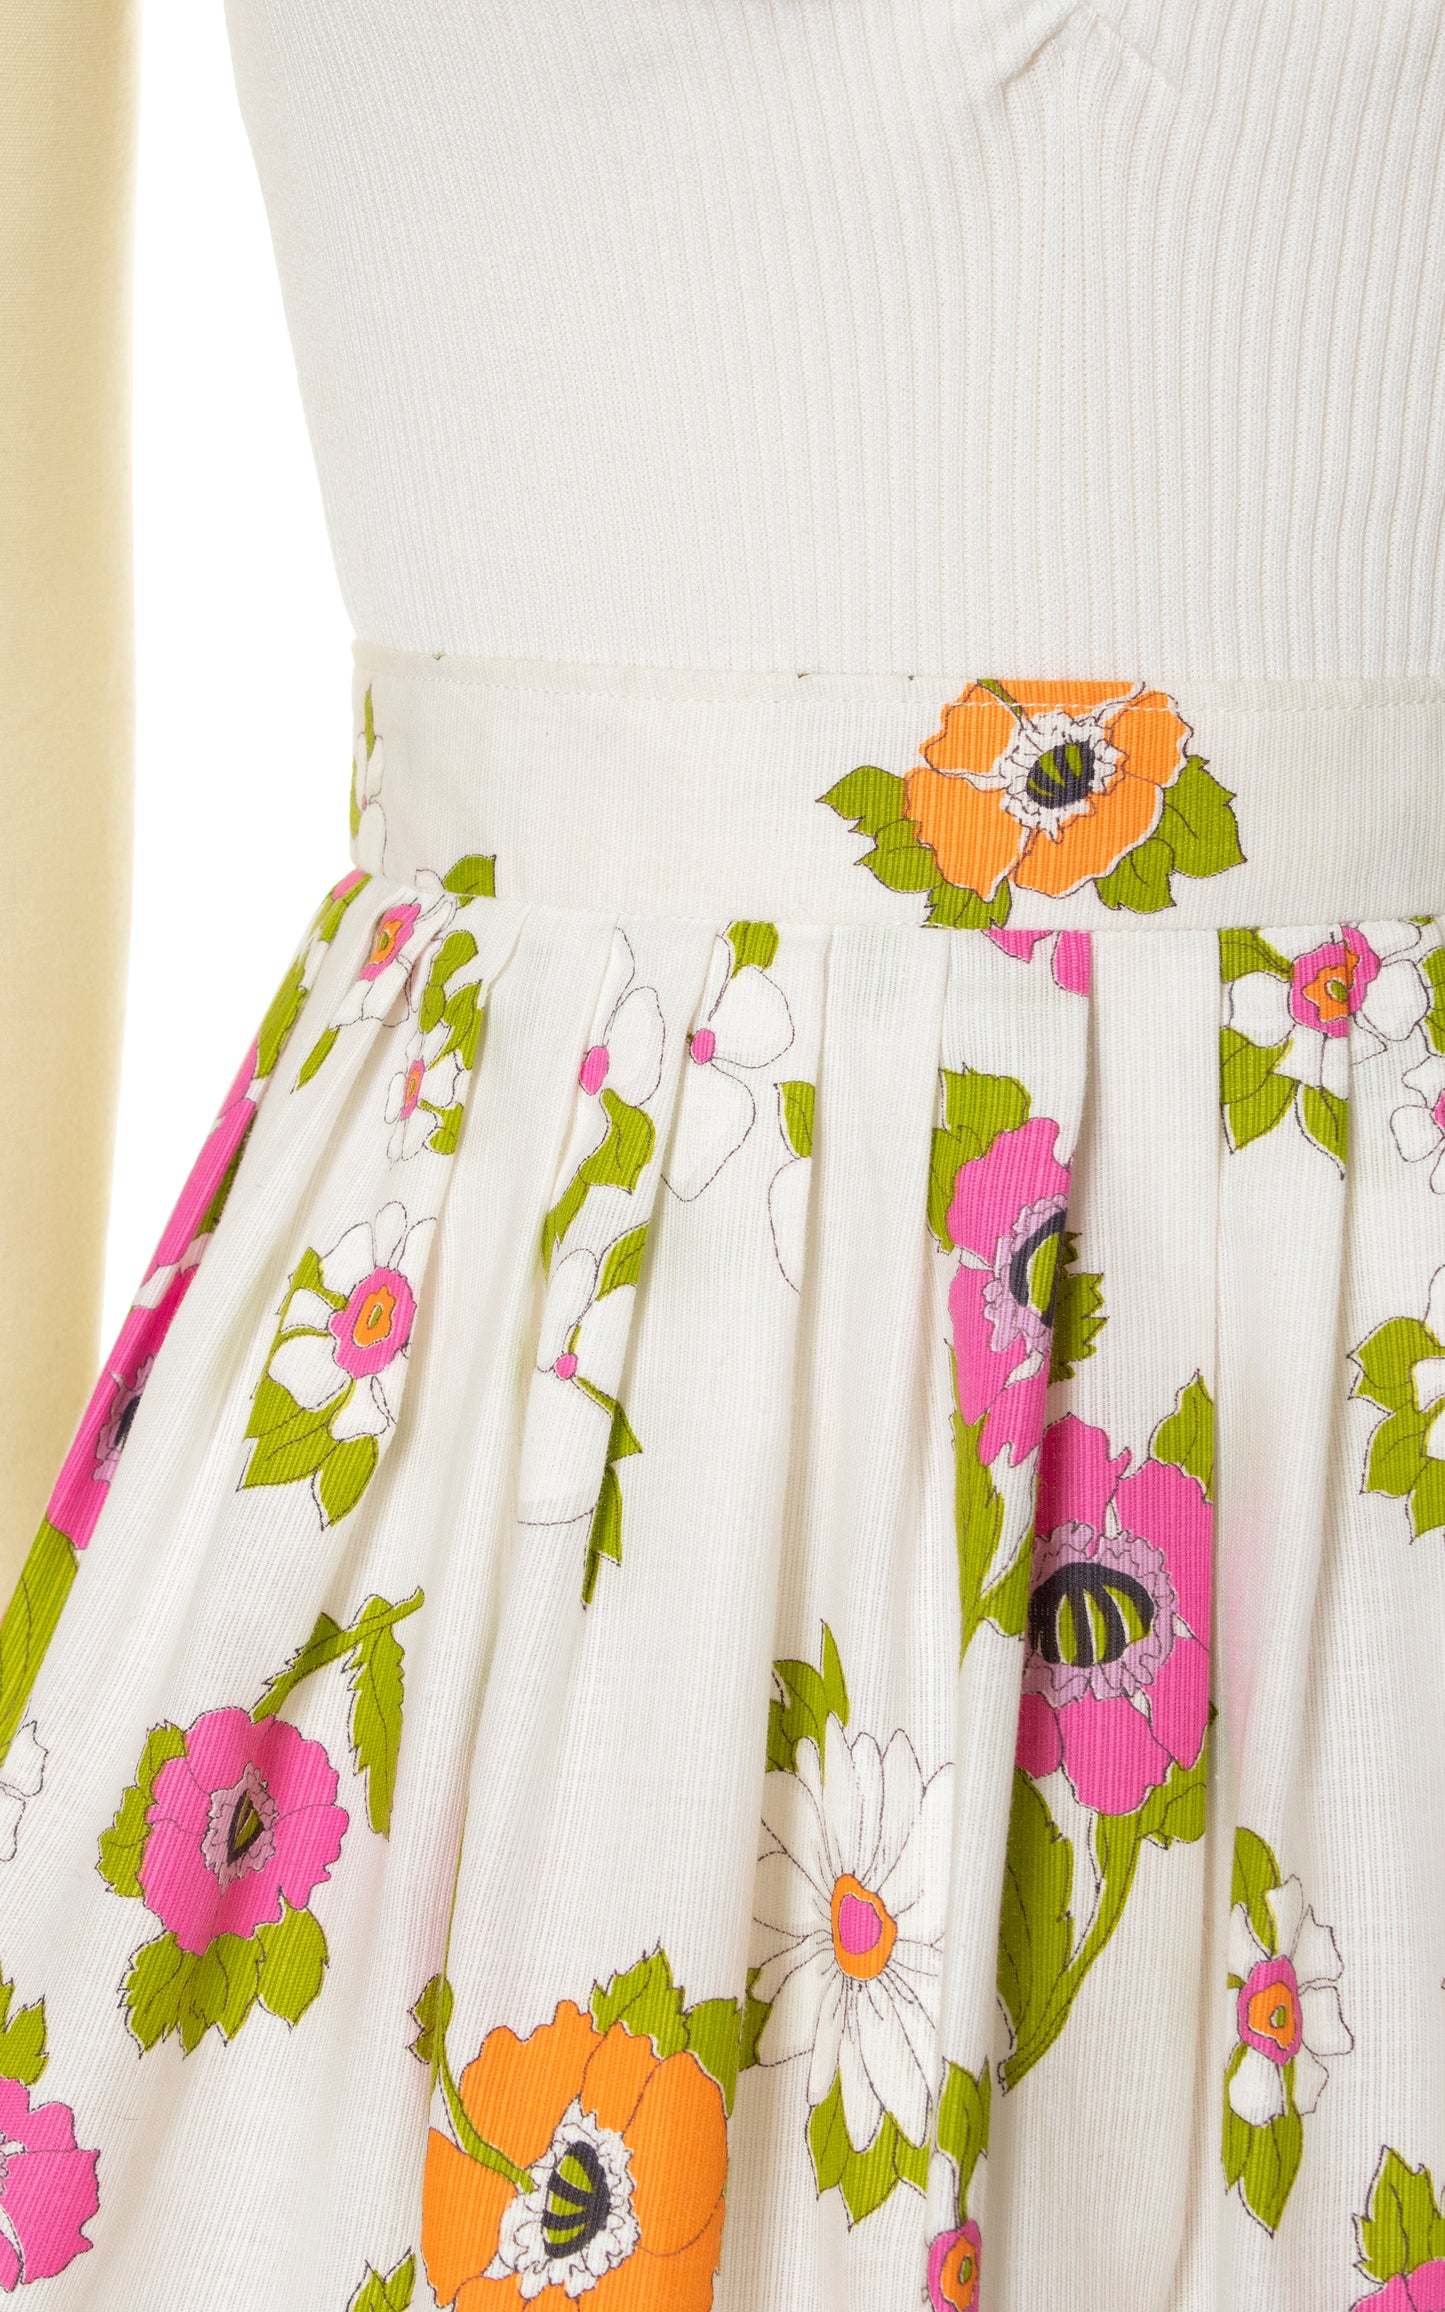 1960s Floral Border Print Cotton Skirt | small